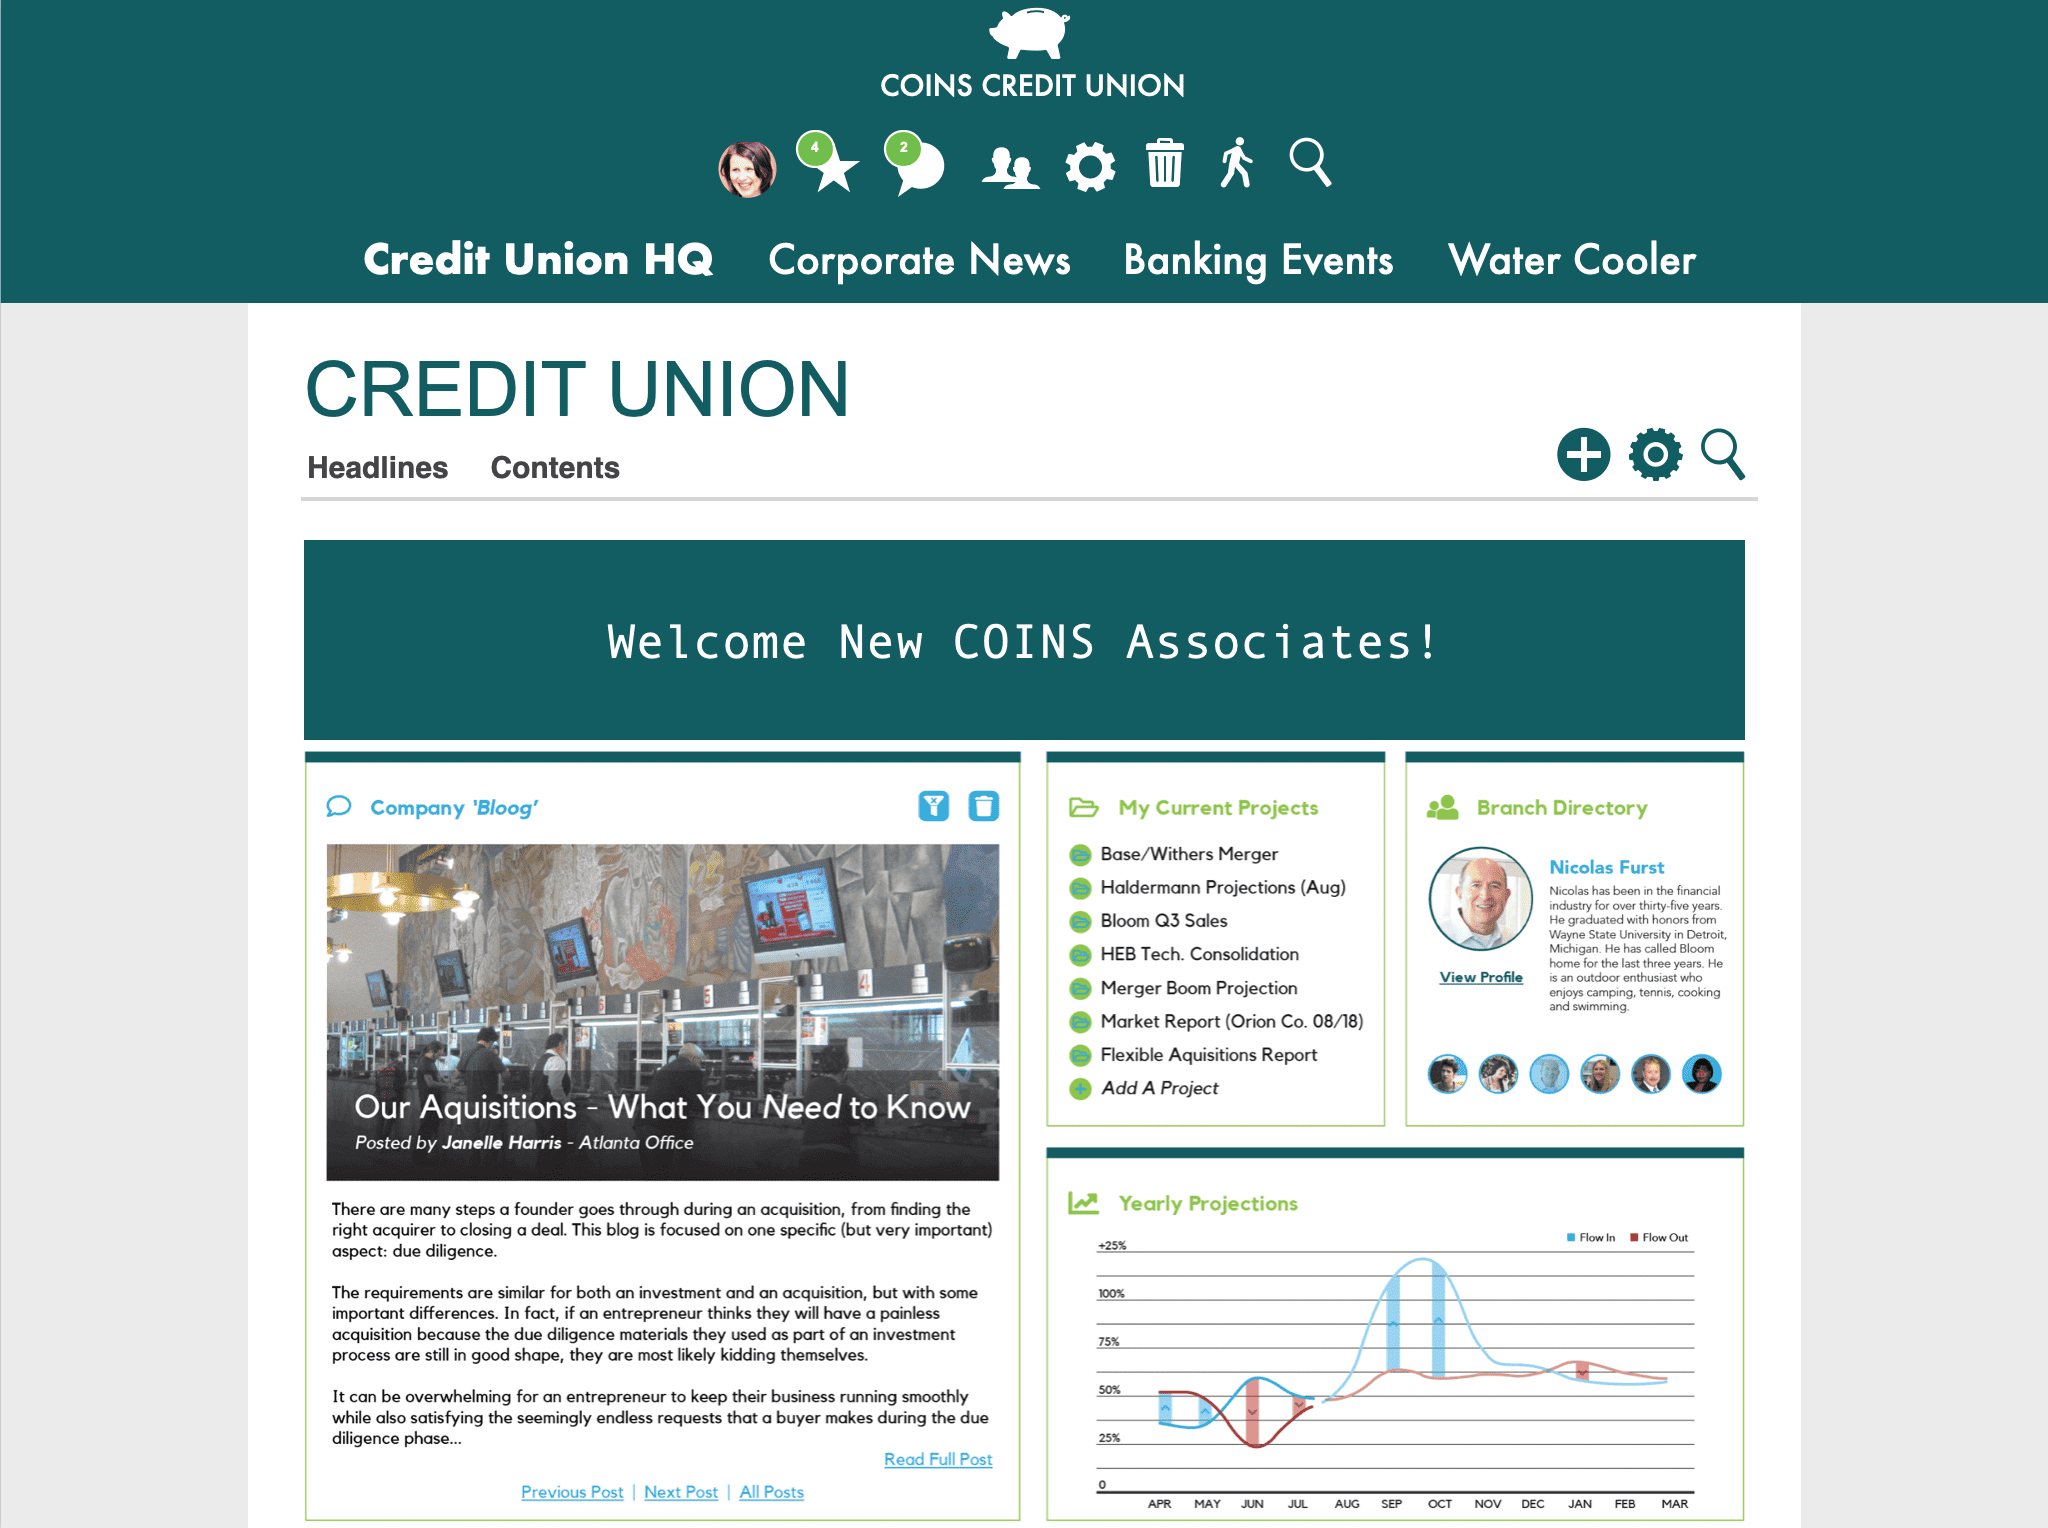 Credit Union Intranet example Top Navigation